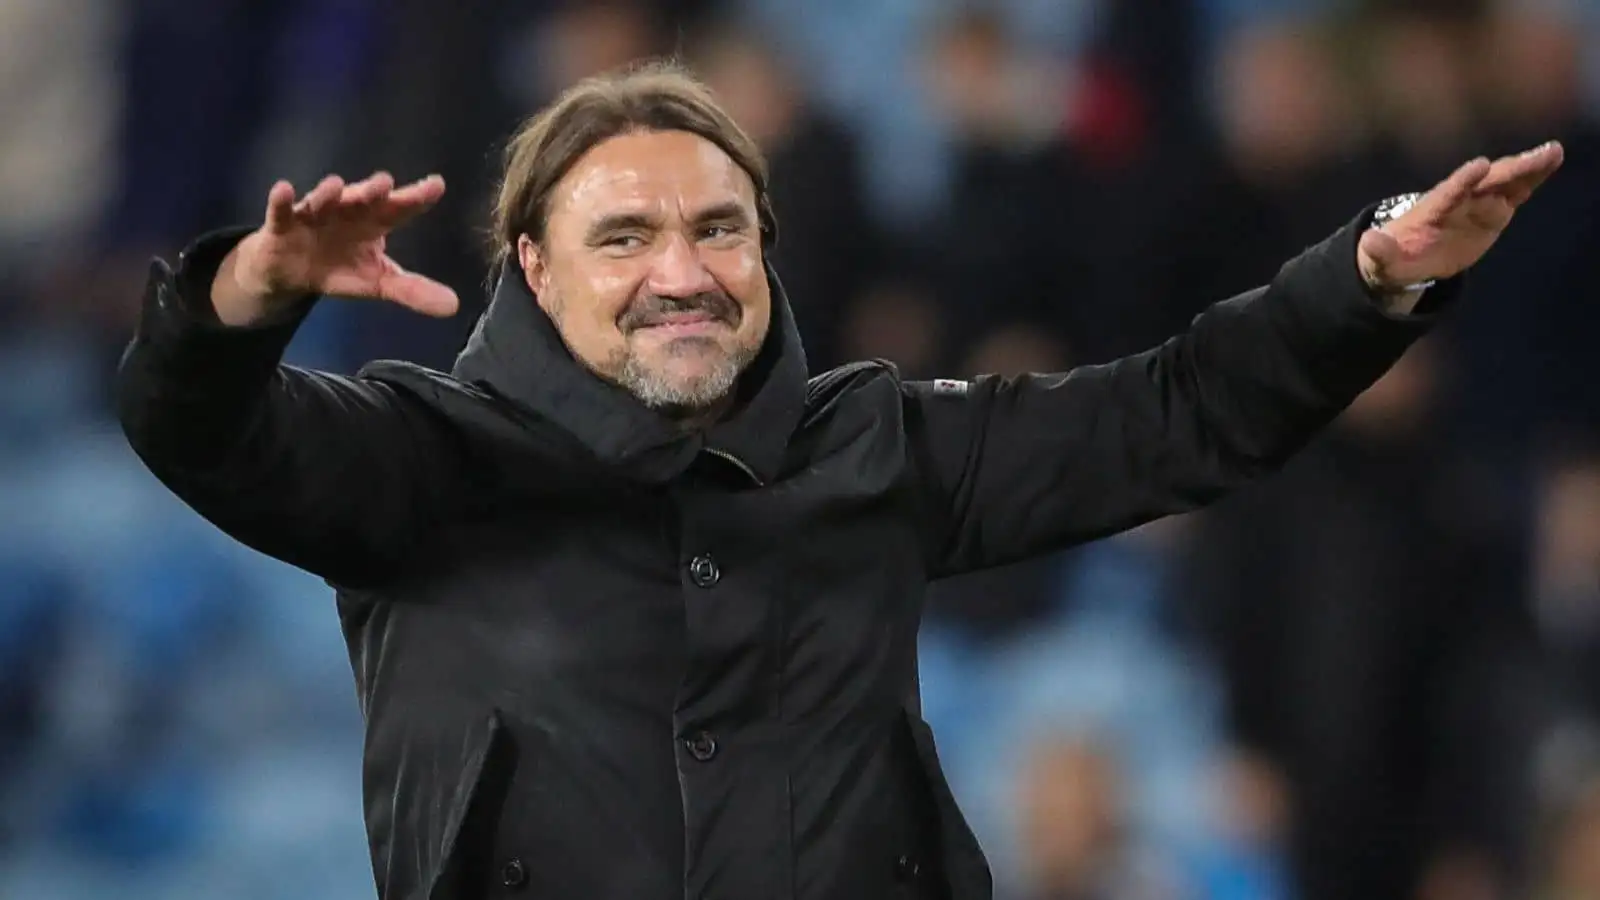 Daniel Farke manager of Leeds United celebrates the victory after the Sky Bet Championship match Leeds United vs Queens Park Rangers at Elland Road